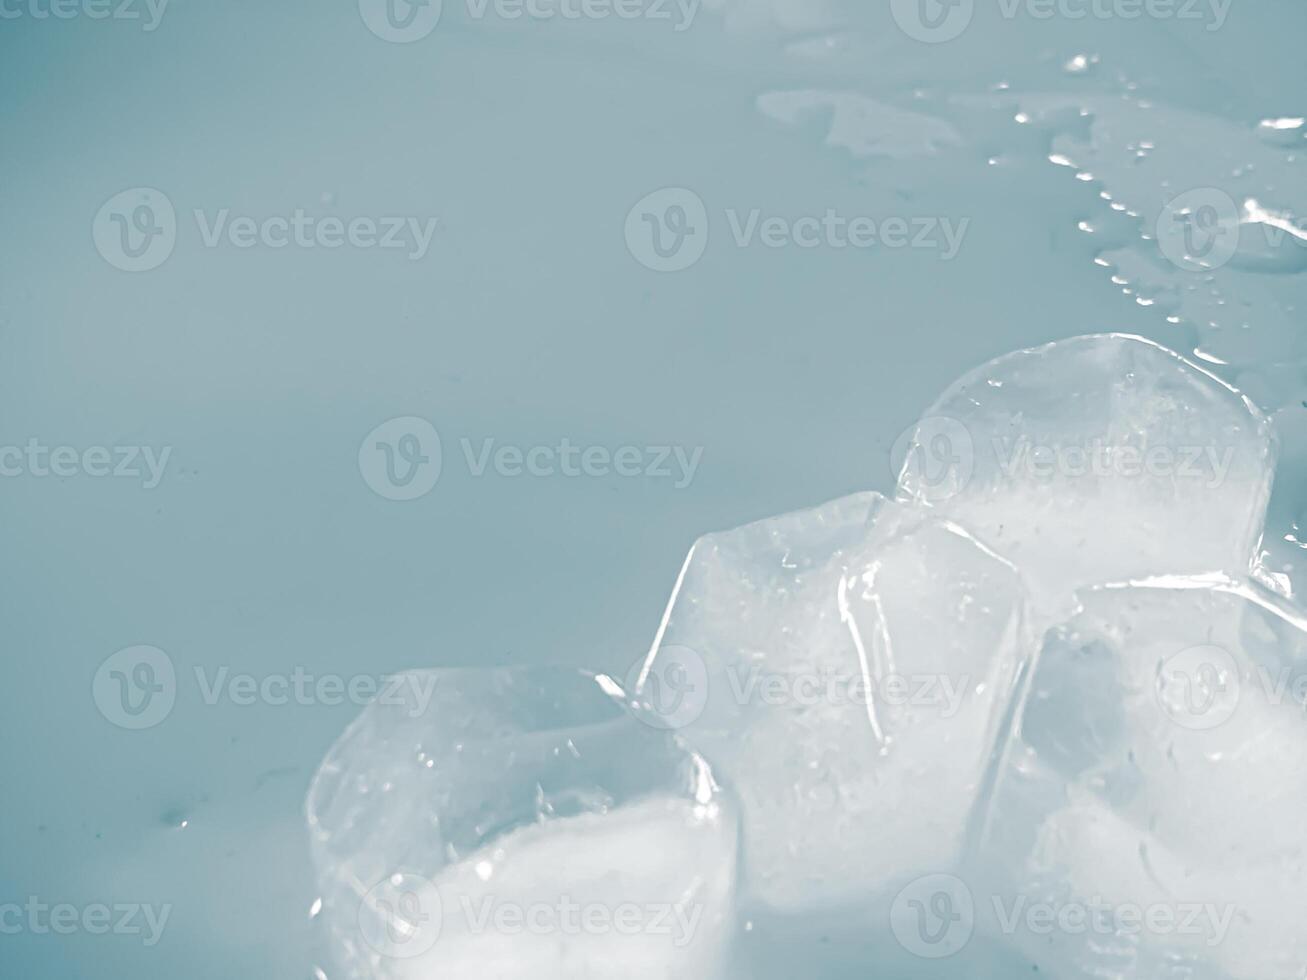 icecubes background,icecubes texture,icecubes wallpaper,ice helps to feel refreshed and cool water from the icecubes helps the water refresh your life and feel good.ice drinks for refreshment business photo